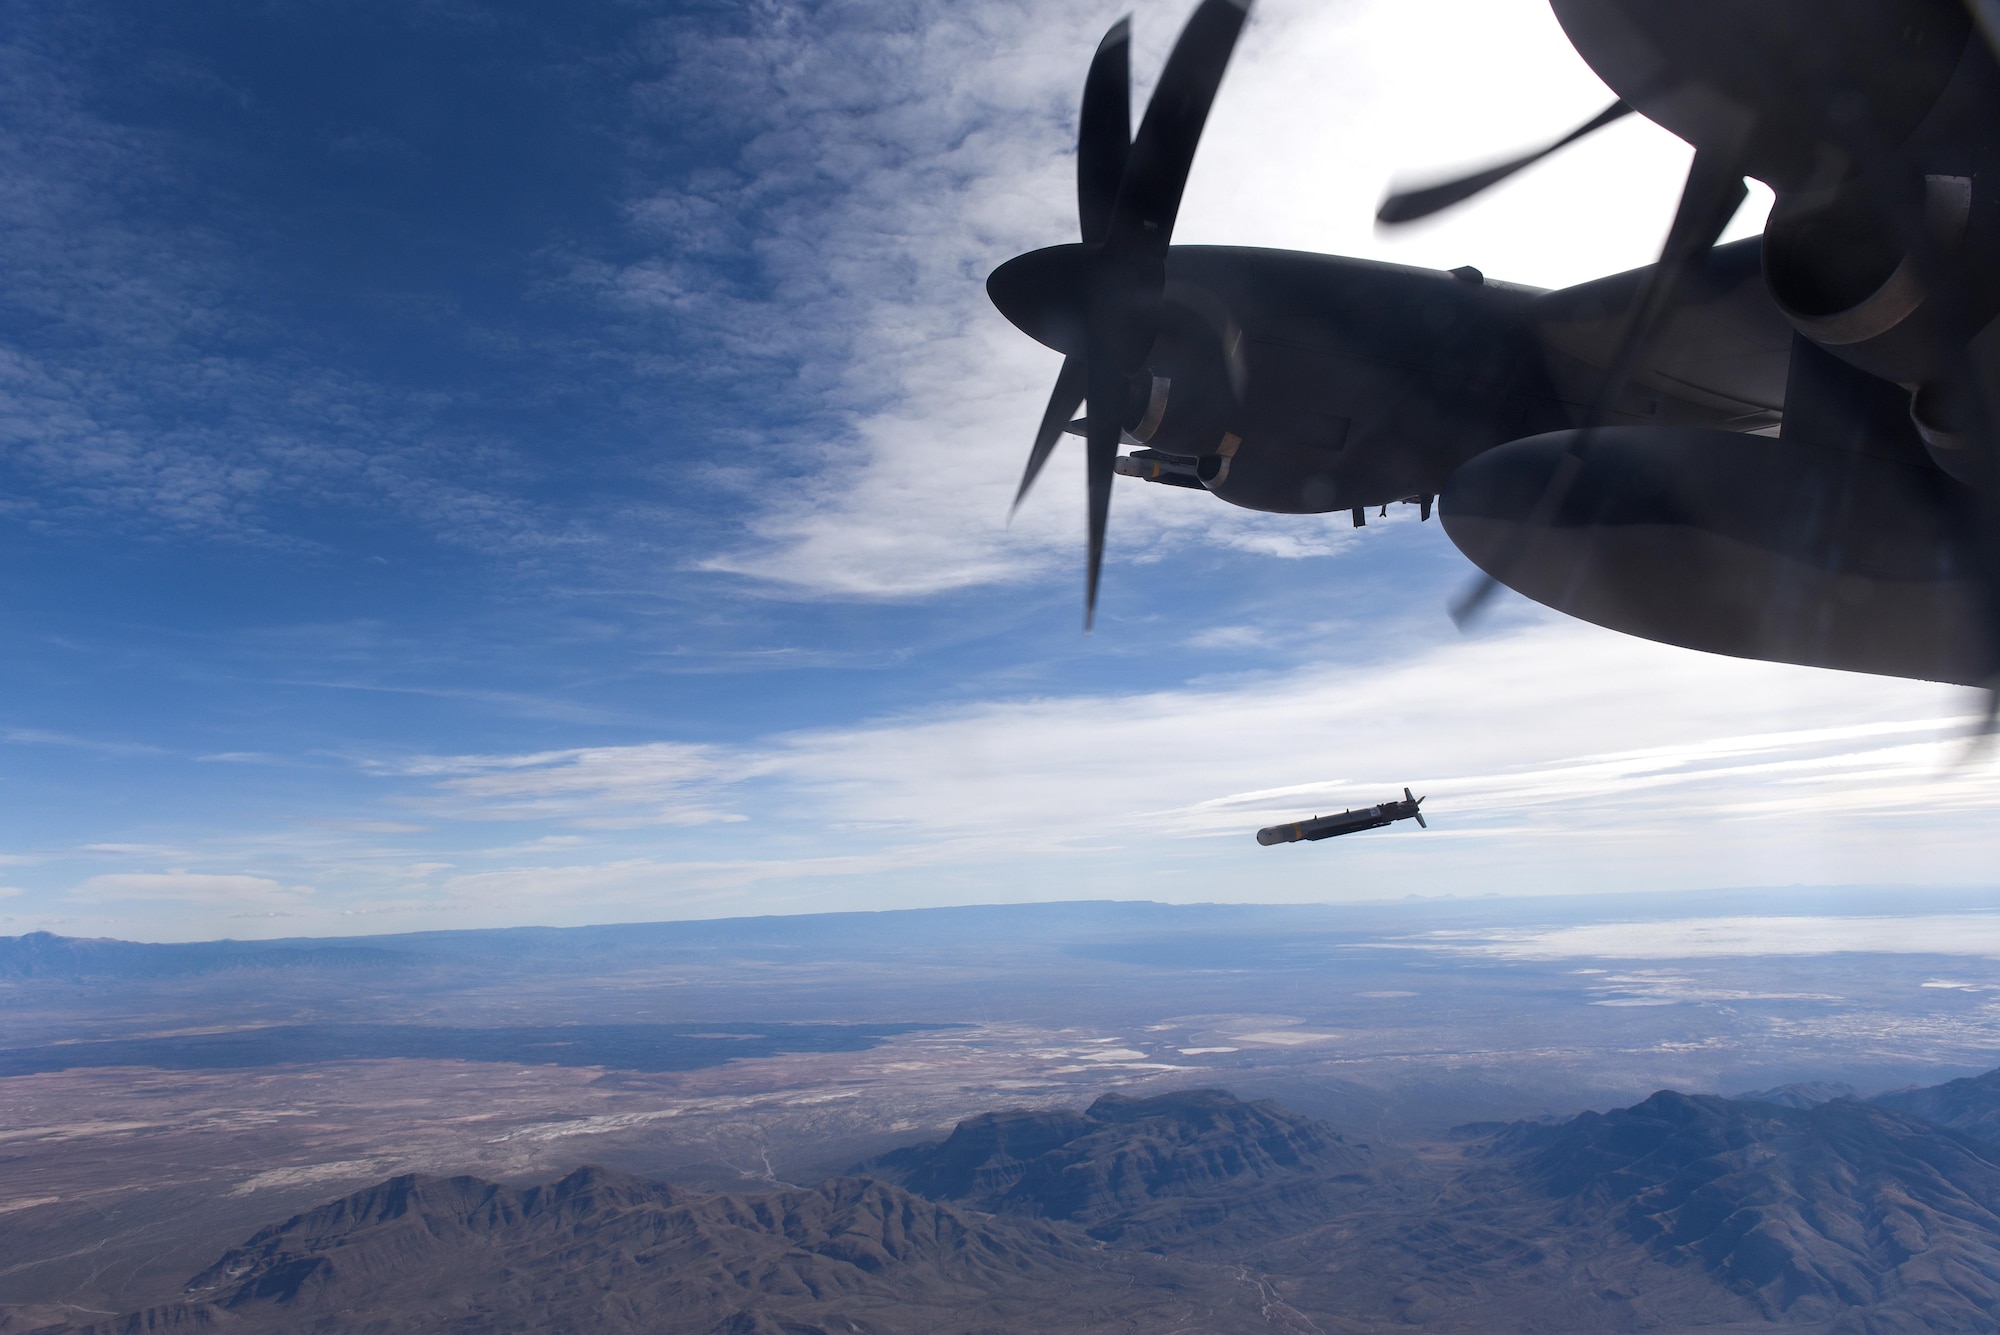 A Laser Guided Small Diameter Bomb is released from the wing of an AC-130J Ghostrider over White Sands Missile Range, N.M., Dec. 13, 2016. The AC-130J is outfitted with multiple weapons systems to include a 30mm and 105mm cannon, GBU-39 Small Diameter Bombs and AGM-176 Griffin missiles. (U.S. Air Force photo by Senior Airman Jeff Parkinson)